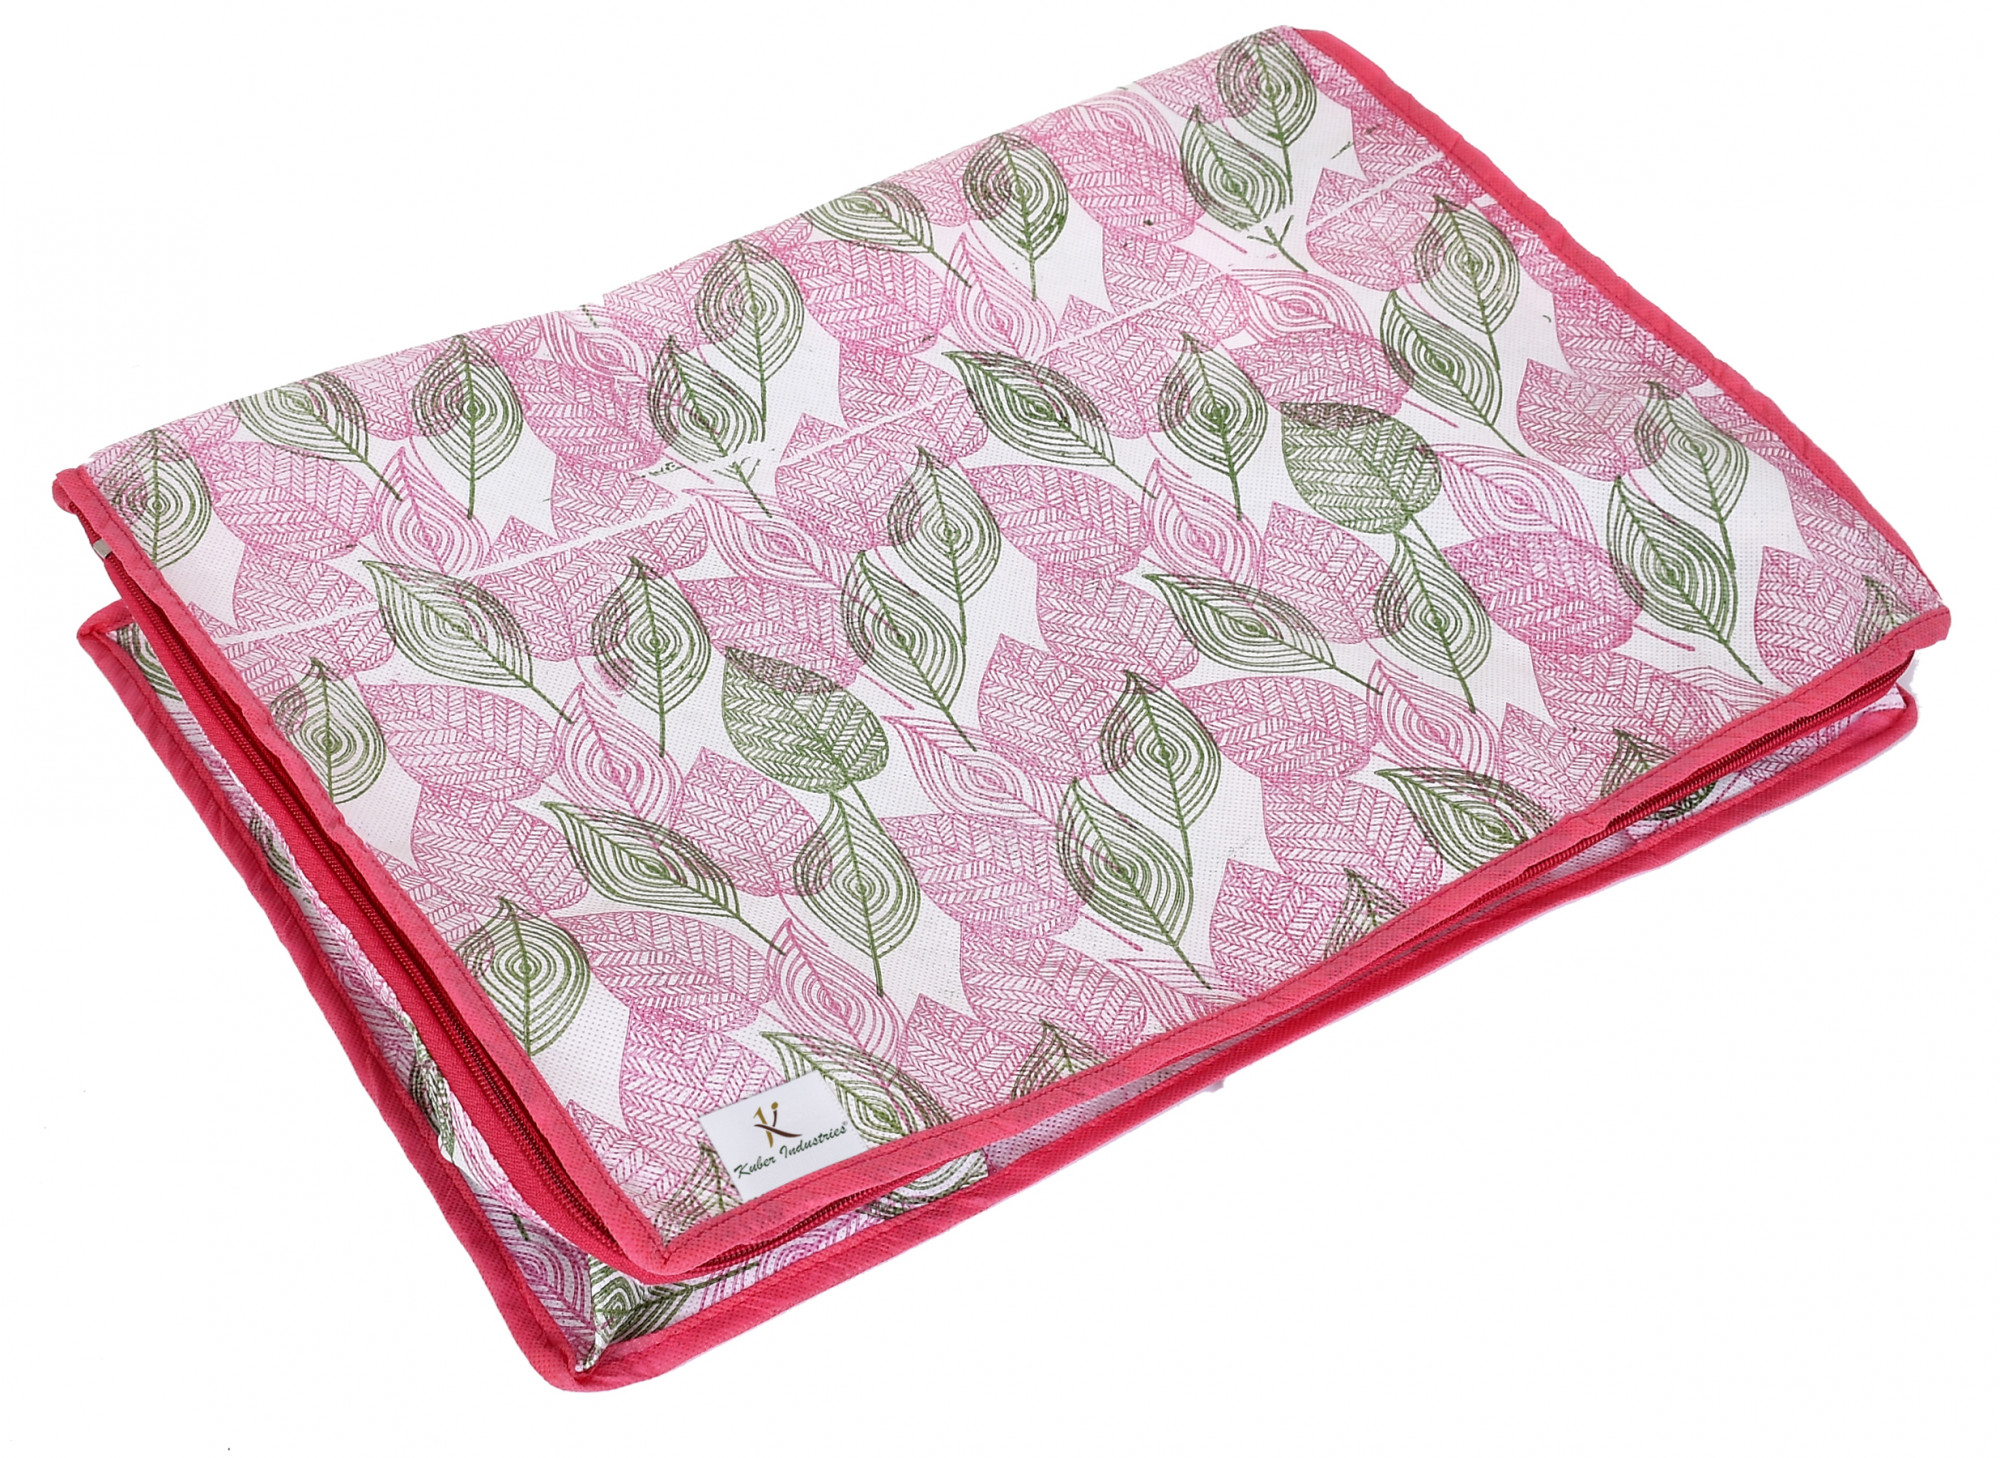 Kuber Industries Metalic Leafy,Flower Print Non Woven Underbed Storage Bag,Cloth Organiser,Blanket Cover with Transparent Window (Pink & Black)-34_S_KUBMART16633